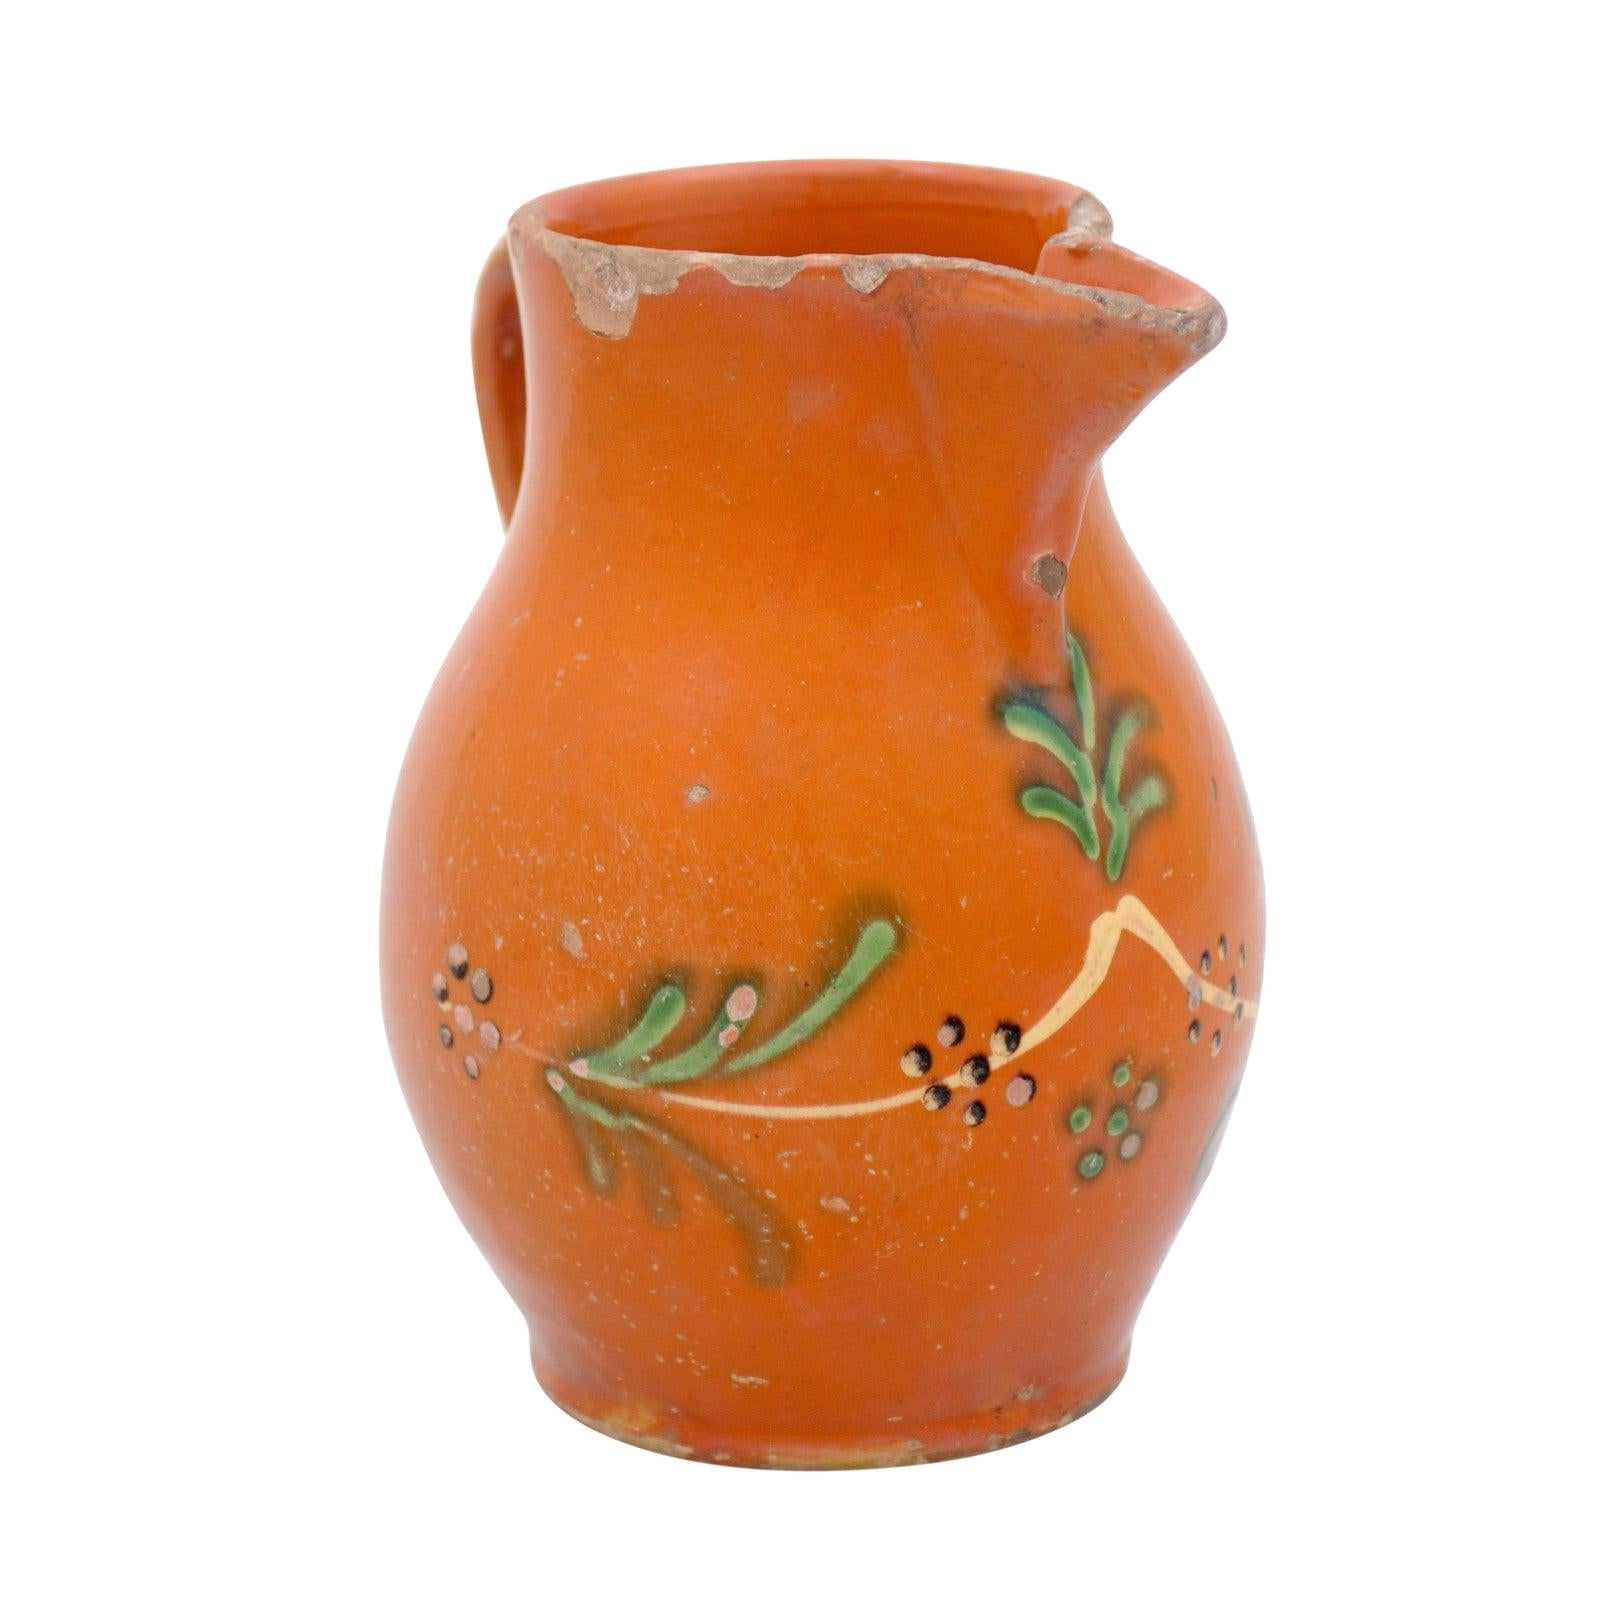 19th Century Rust and Green Glazed Pottery Jug with Floral Decor